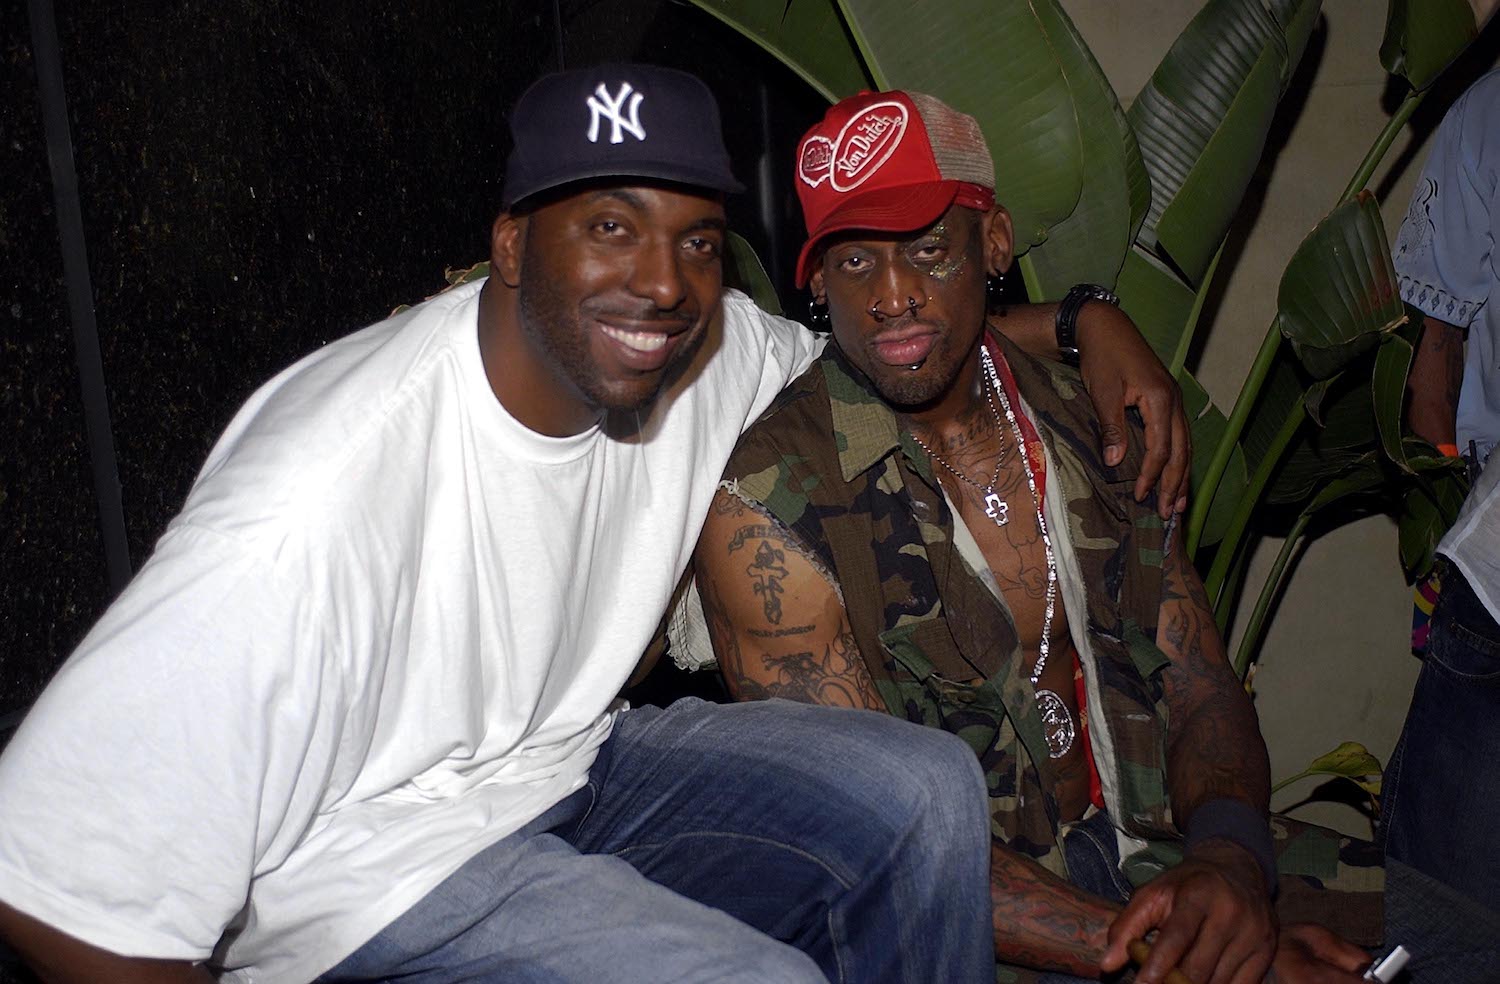 John Salley (L) and Dennis Rodman (R), who played together as members of the Detroit Pistons and Chicago Bulls, enjoy a night out.